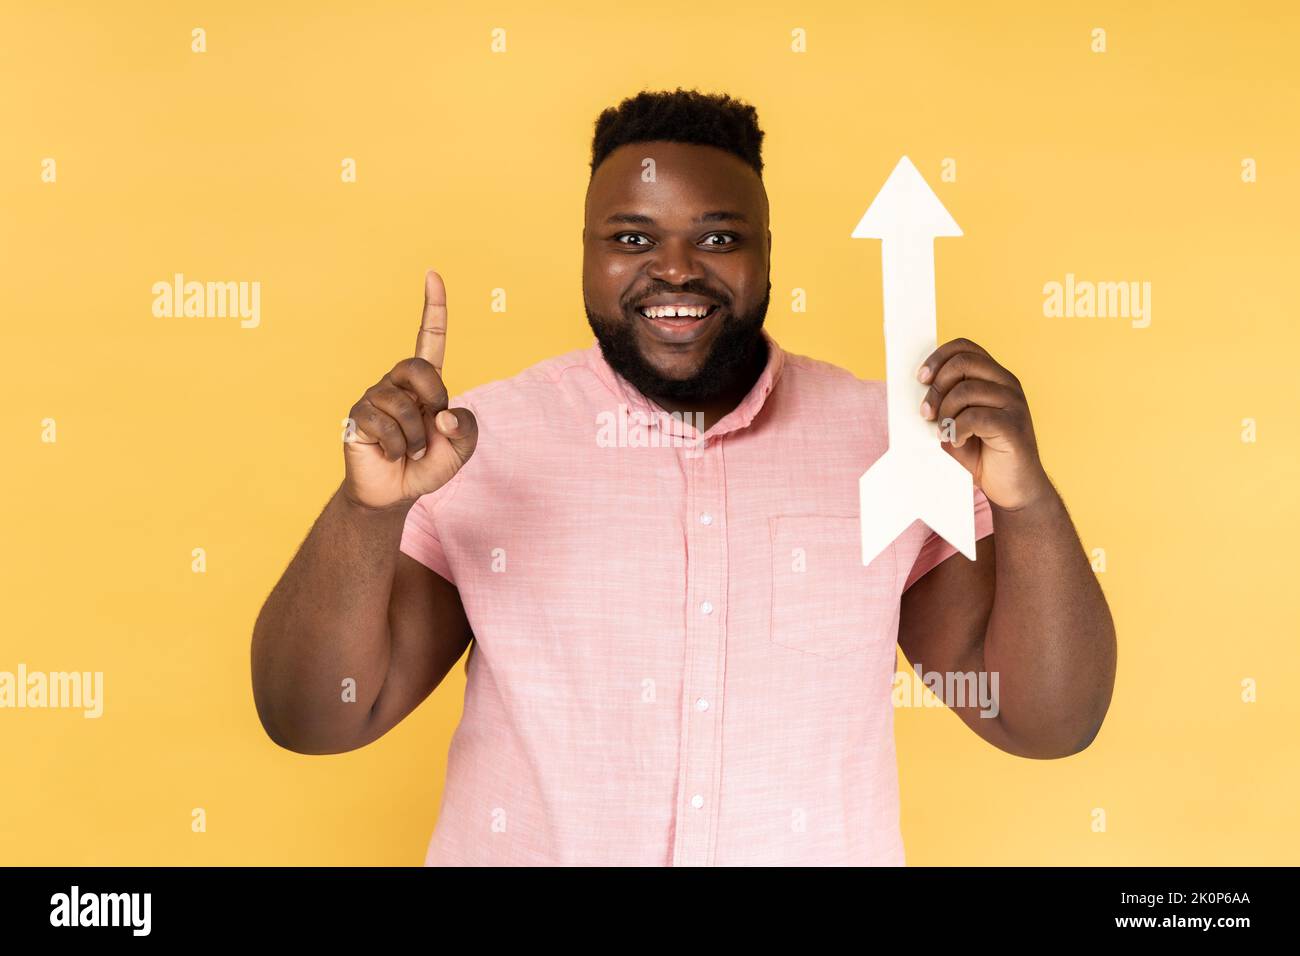 Portrait of satisfied delighted happy man wearing pink shirt holding arrow pointing up, raising finger, having idea, growth and increase concept. Indoor studio shot isolated on yellow background. Stock Photo